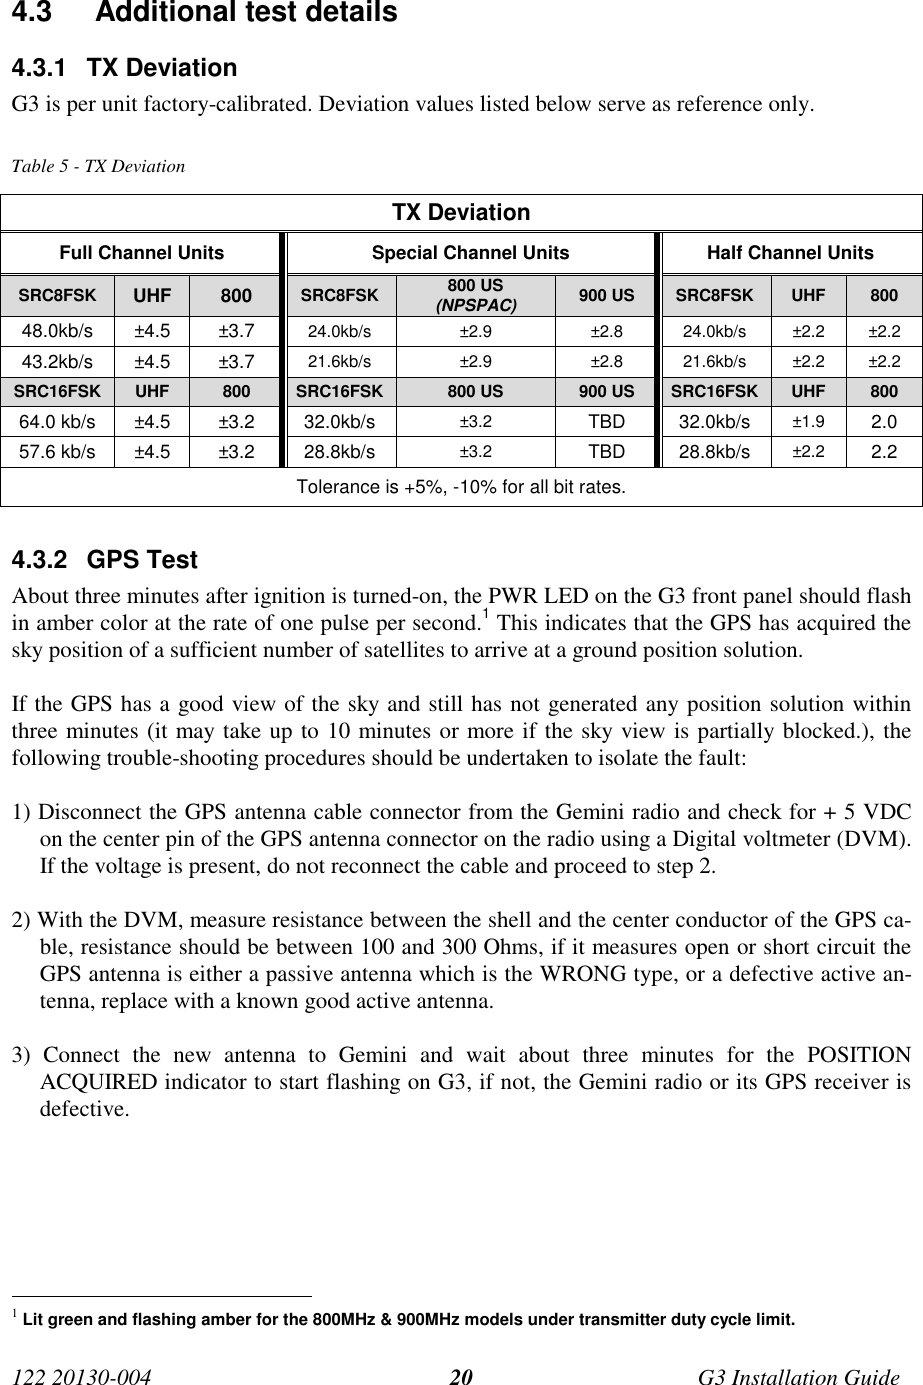 122 20130-004 G3 Installation Guide204.3   Additional test details4.3.1 TX DeviationG3 is per unit factory-calibrated. Deviation values listed below serve as reference only.Table 5 - TX DeviationTX DeviationFull Channel Units Special Channel Units Half Channel UnitsSRC8FSK UHF 800 SRC8FSK 800 US(NPSPAC) 900 US SRC8FSK UHF 80048.0kb/s ±4.5 ±3.7 24.0kb/s ±2.9 ±2.8 24.0kb/s ±2.2 ±2.243.2kb/s ±4.5 ±3.7 21.6kb/s ±2.9 ±2.8 21.6kb/s ±2.2 ±2.2SRC16FSK UHF 800 SRC16FSK 800 US 900 US SRC16FSK UHF 80064.0 kb/s ±4.5 ±3.2 32.0kb/s ±3.2 TBD 32.0kb/s ±1.9 2.057.6 kb/s ±4.5 ±3.2 28.8kb/s ±3.2 TBD 28.8kb/s ±2.2 2.2Tolerance is +5%, -10% for all bit rates.4.3.2 GPS TestAbout three minutes after ignition is turned-on, the PWR LED on the G3 front panel should flashin amber color at the rate of one pulse per second.1 This indicates that the GPS has acquired thesky position of a sufficient number of satellites to arrive at a ground position solution.If the GPS has a good view of the sky and still has not generated any position solution withinthree minutes (it may take up to 10 minutes or more if the sky view is partially blocked.), thefollowing trouble-shooting procedures should be undertaken to isolate the fault:1) Disconnect the GPS antenna cable connector from the Gemini radio and check for + 5 VDCon the center pin of the GPS antenna connector on the radio using a Digital voltmeter (DVM).If the voltage is present, do not reconnect the cable and proceed to step 2.2) With the DVM, measure resistance between the shell and the center conductor of the GPS ca-ble, resistance should be between 100 and 300 Ohms, if it measures open or short circuit theGPS antenna is either a passive antenna which is the WRONG type, or a defective active an-tenna, replace with a known good active antenna.3) Connect the new antenna to Gemini and wait about three minutes for the POSITIONACQUIRED indicator to start flashing on G3, if not, the Gemini radio or its GPS receiver isdefective.                                                     1 Lit green and flashing amber for the 800MHz &amp; 900MHz models under transmitter duty cycle limit.